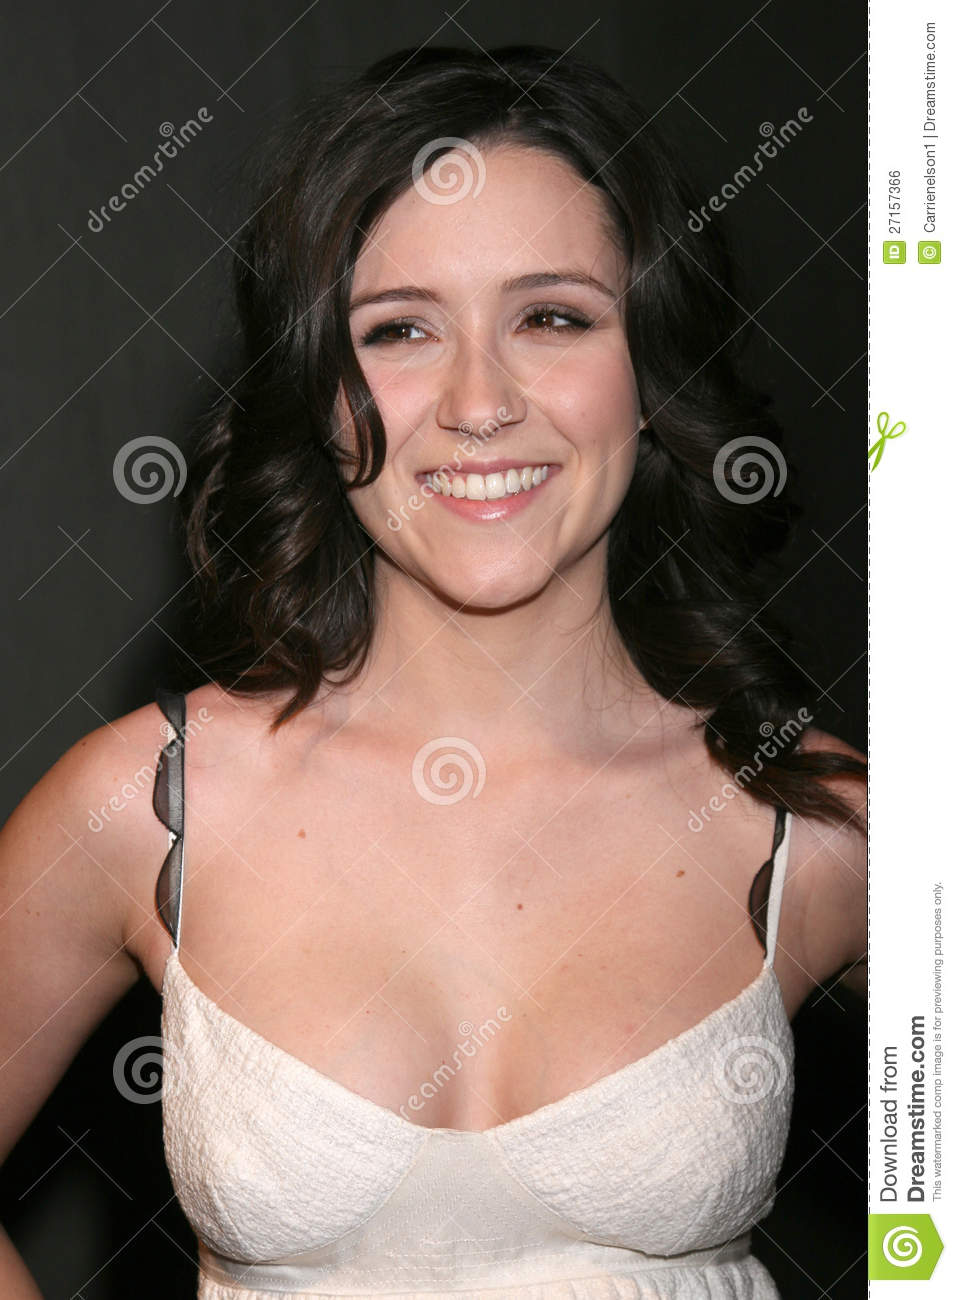 shannon-woodward-pictures.jpg